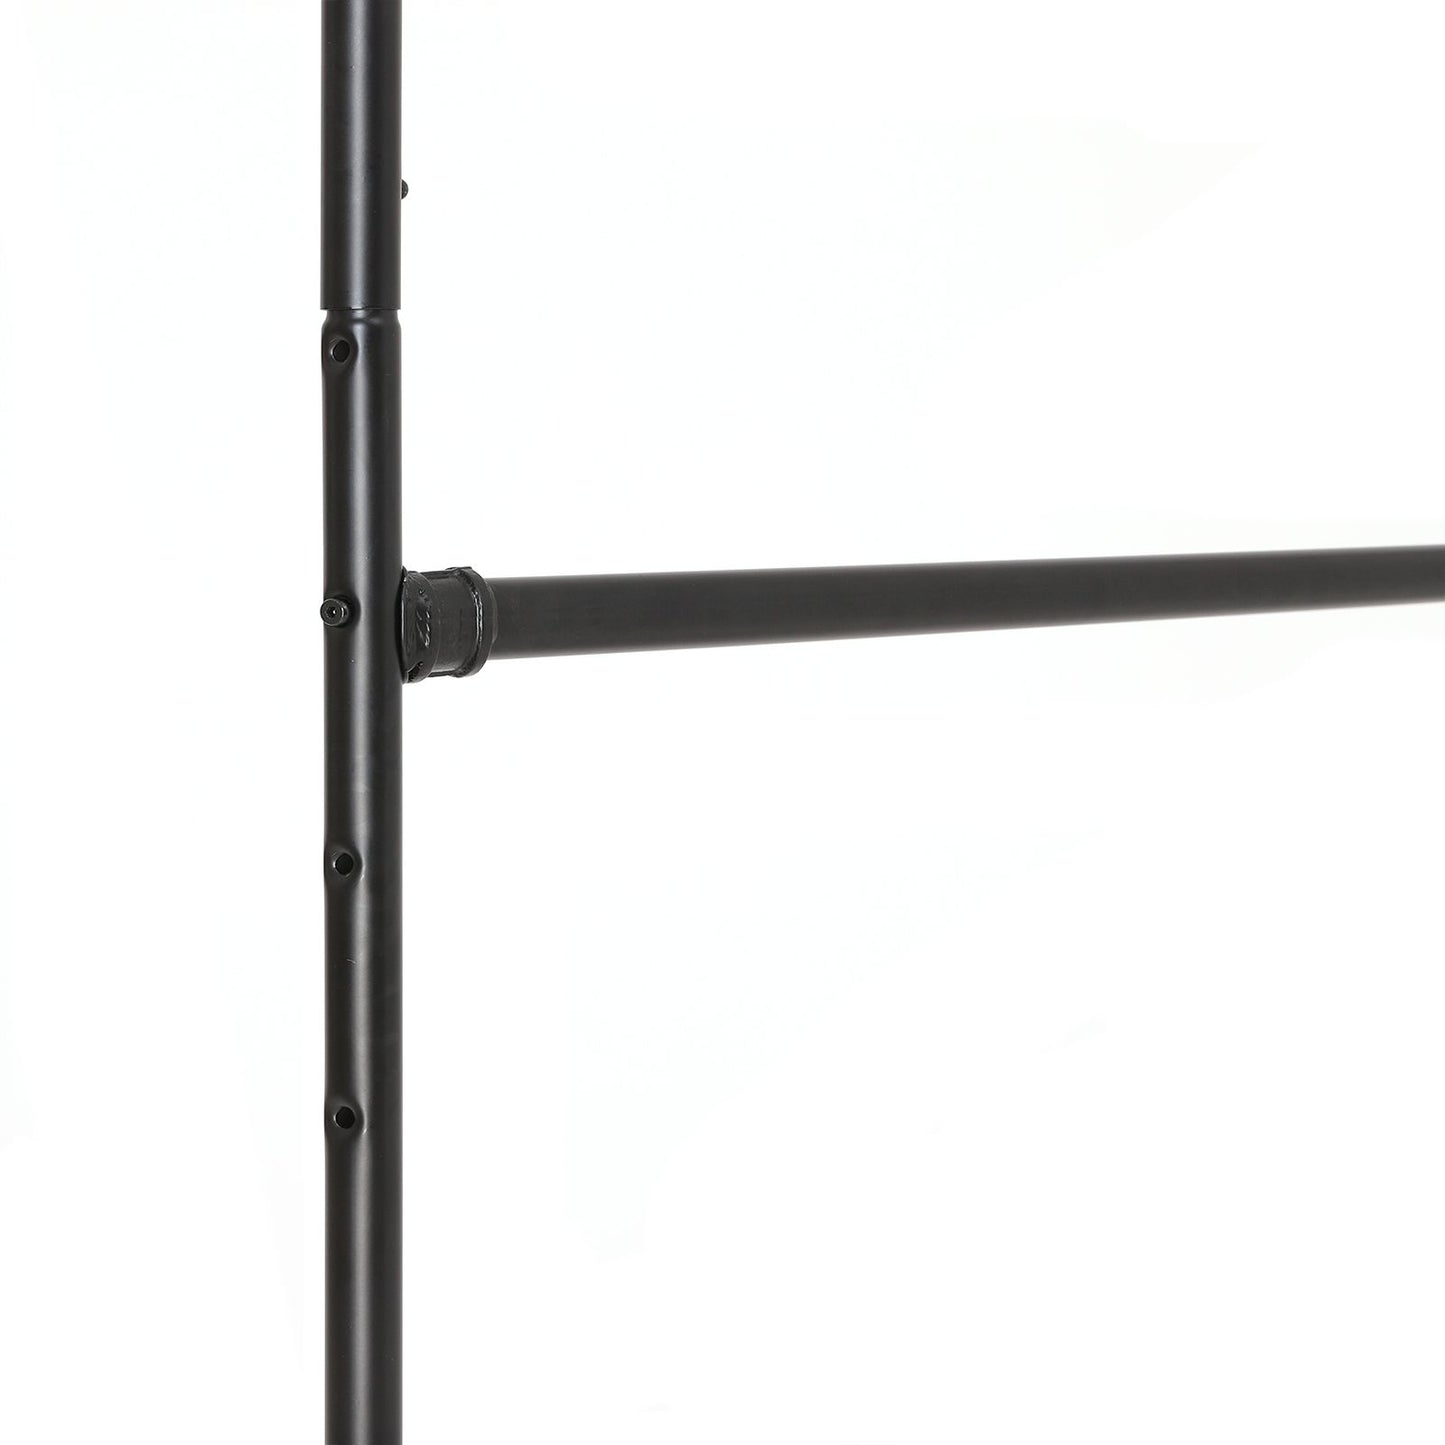 Clothes Rail, Coat Rack with Shoe Storage, Industrial Clothes Rail, on Wheels, Maximum load of 110 Kg, Black, SONGMICS, 5